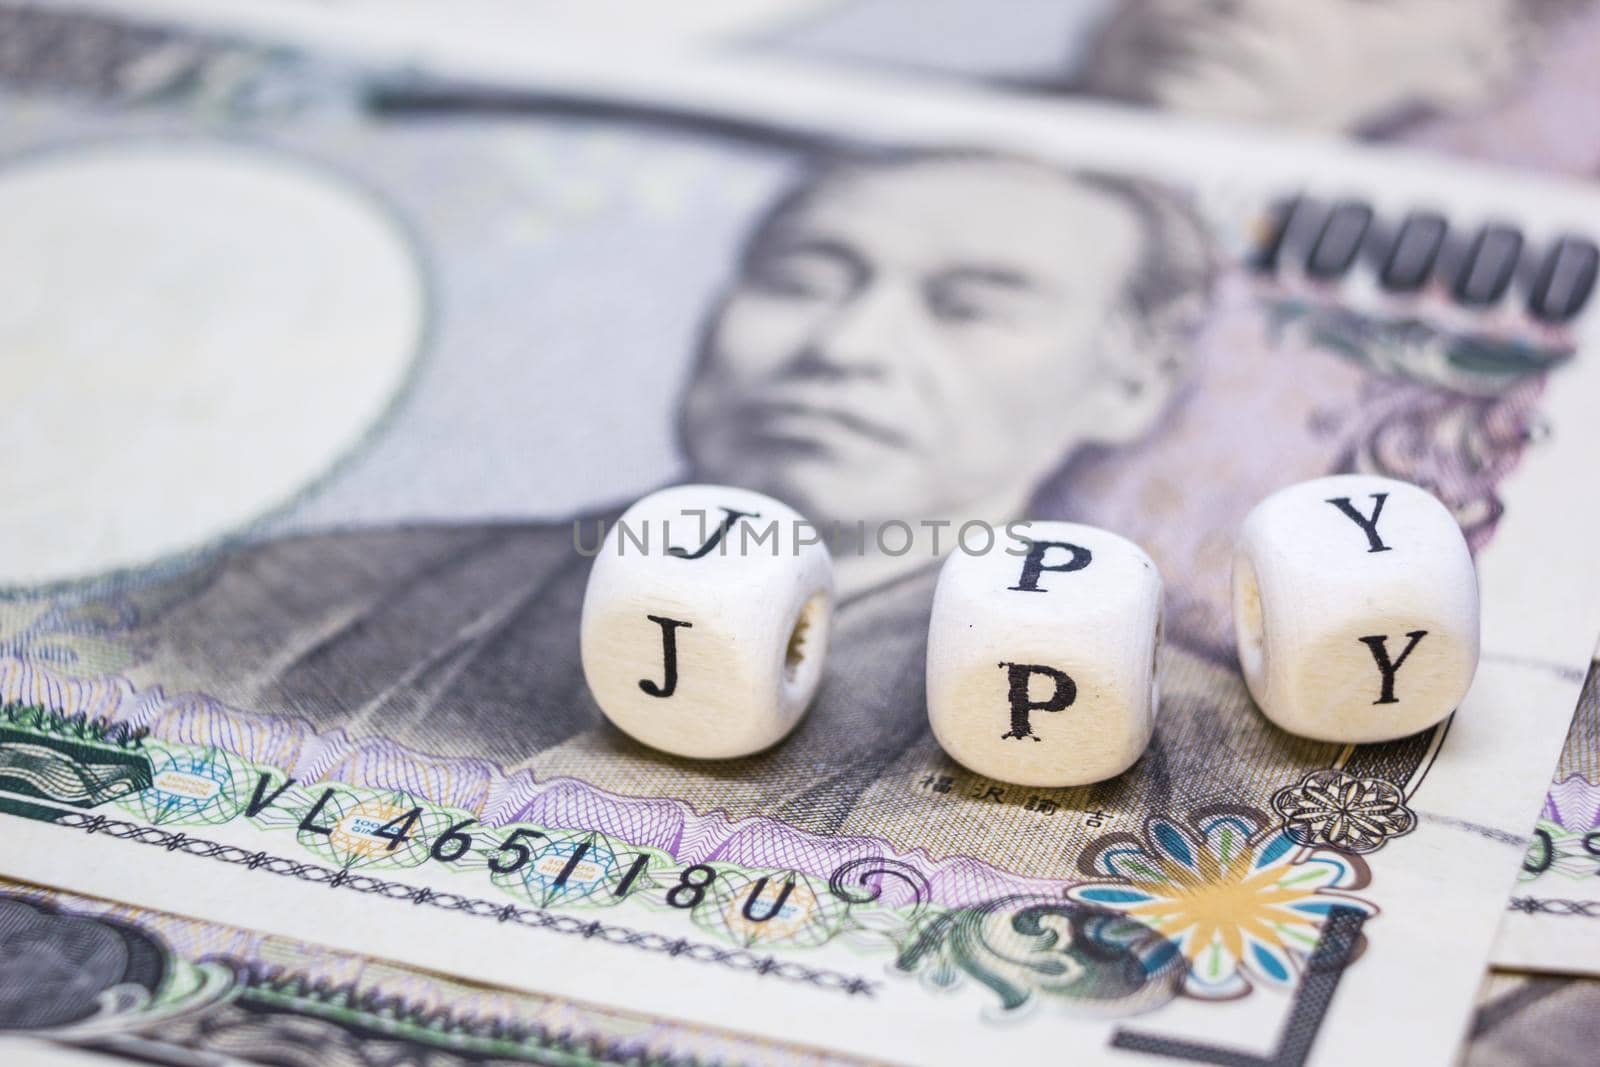 close-up of wooden cube with text "J P Y" on banknote YEN for business and financial concept. by rakoptonLPN